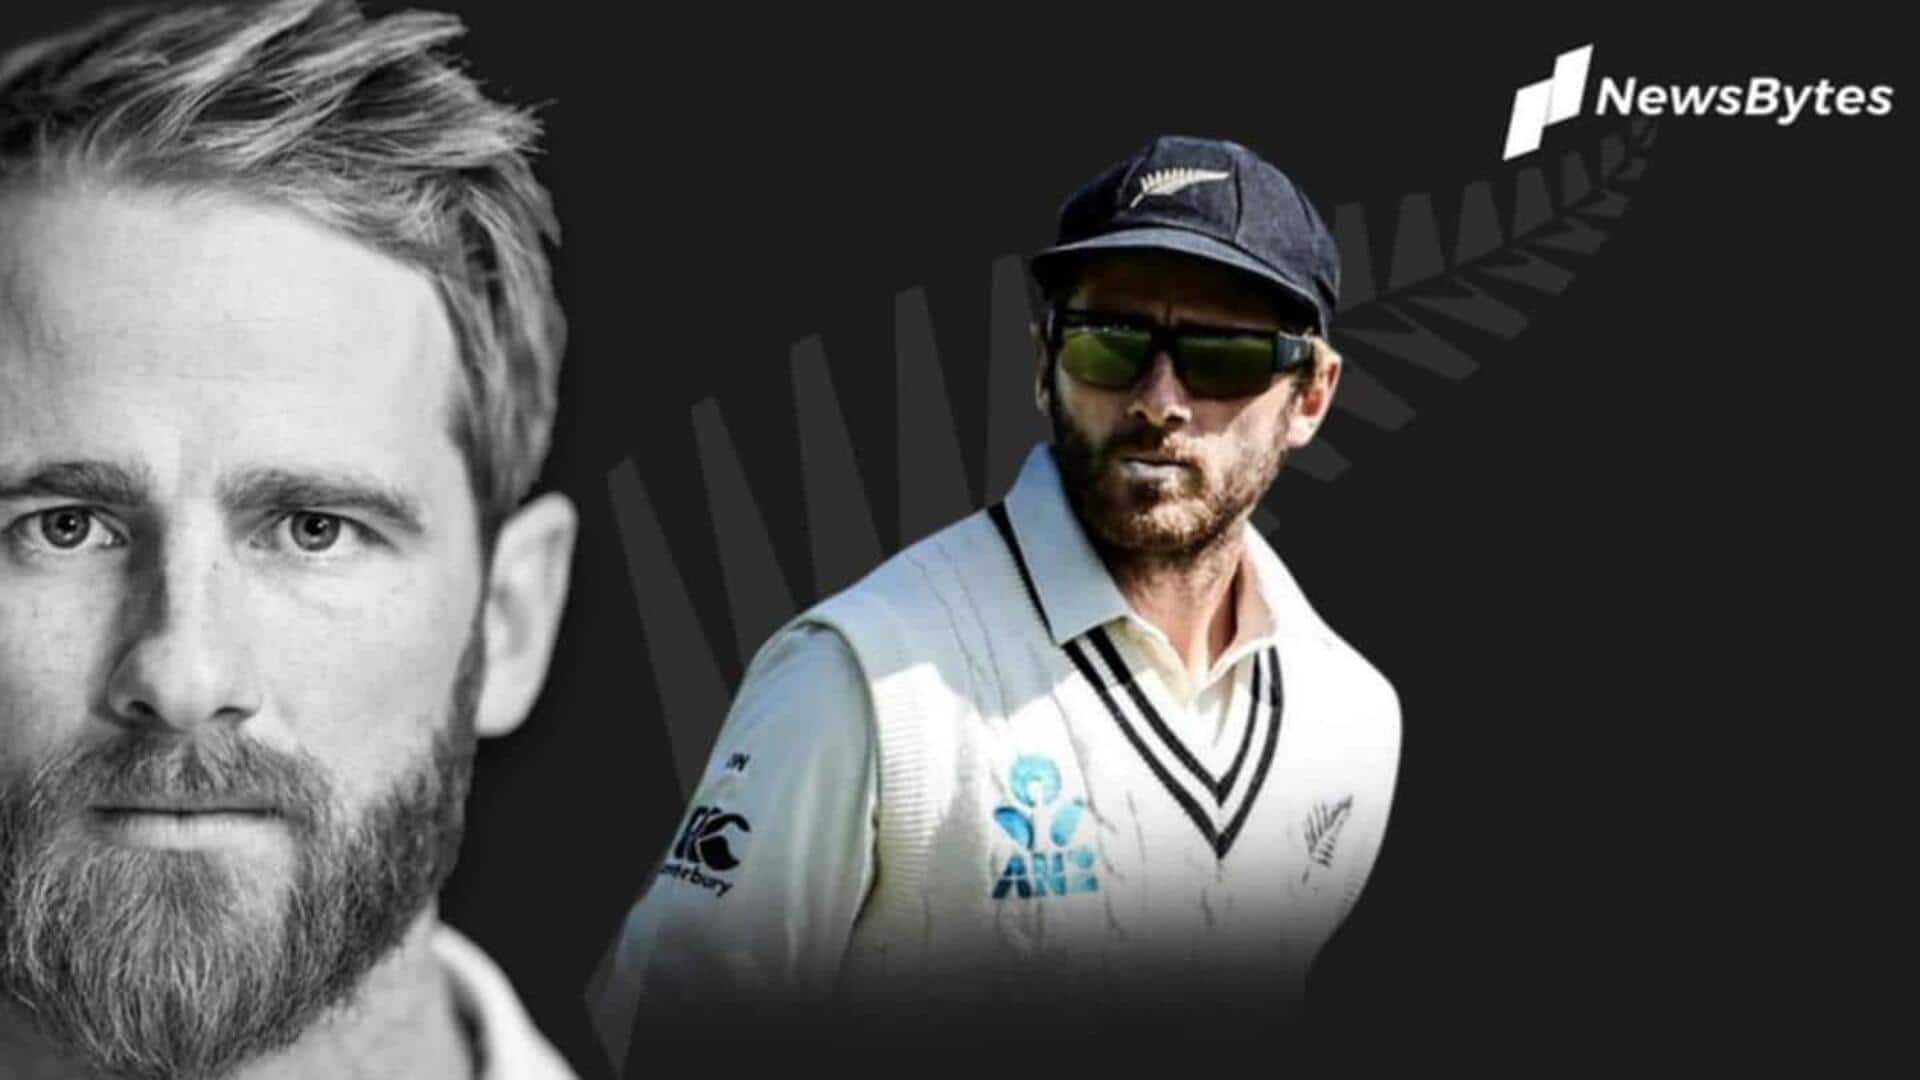 Here's how Kane Williamson fared as New Zealand's captain